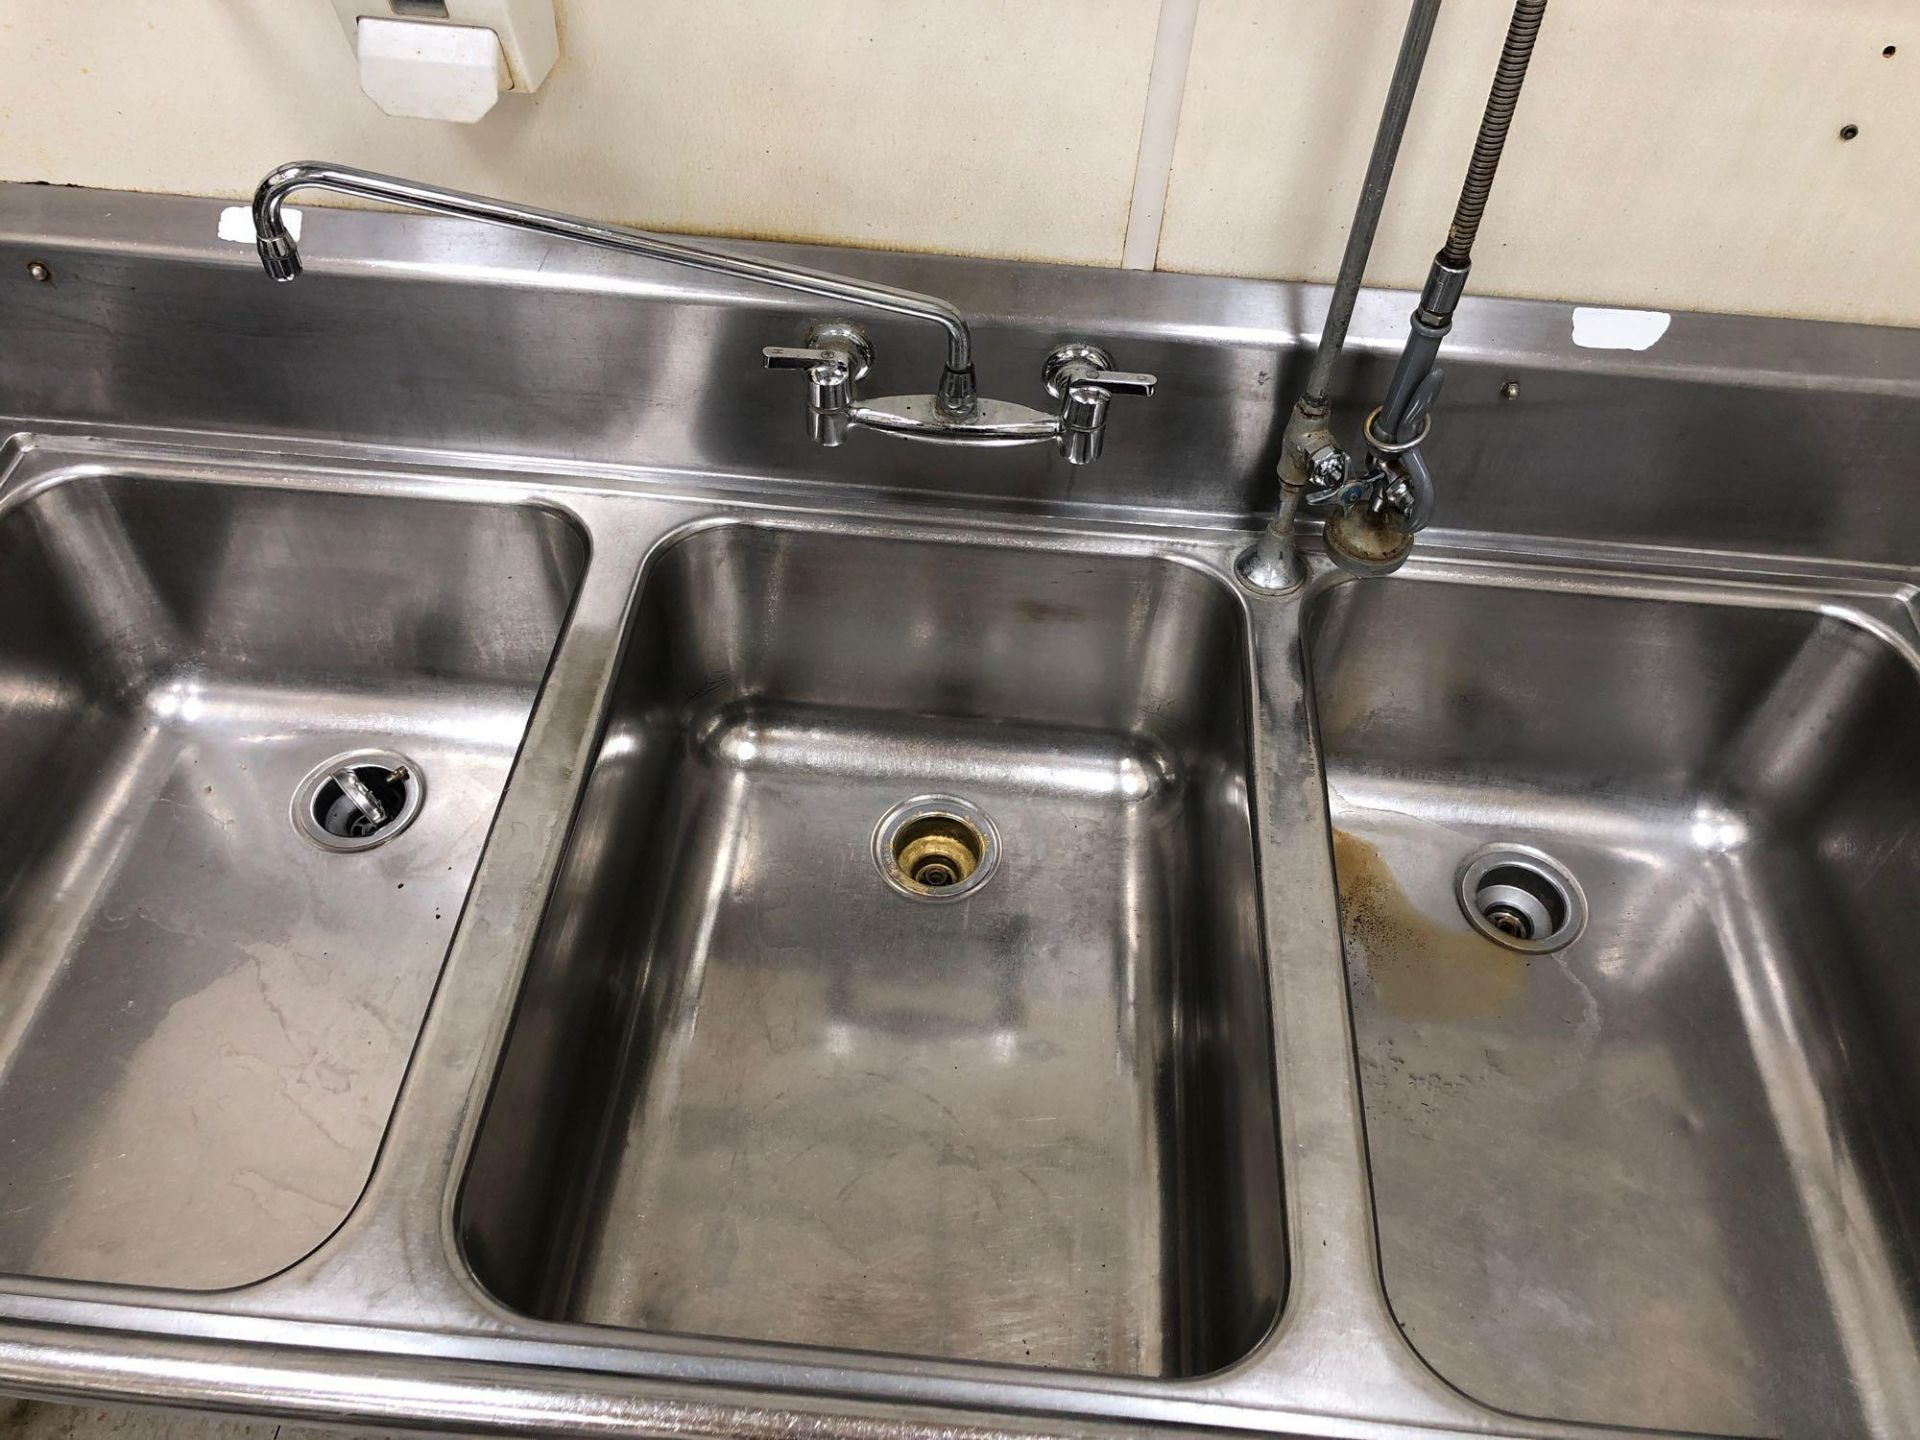 Advance 3 Compartment Stainless Steel Sink - Image 2 of 3